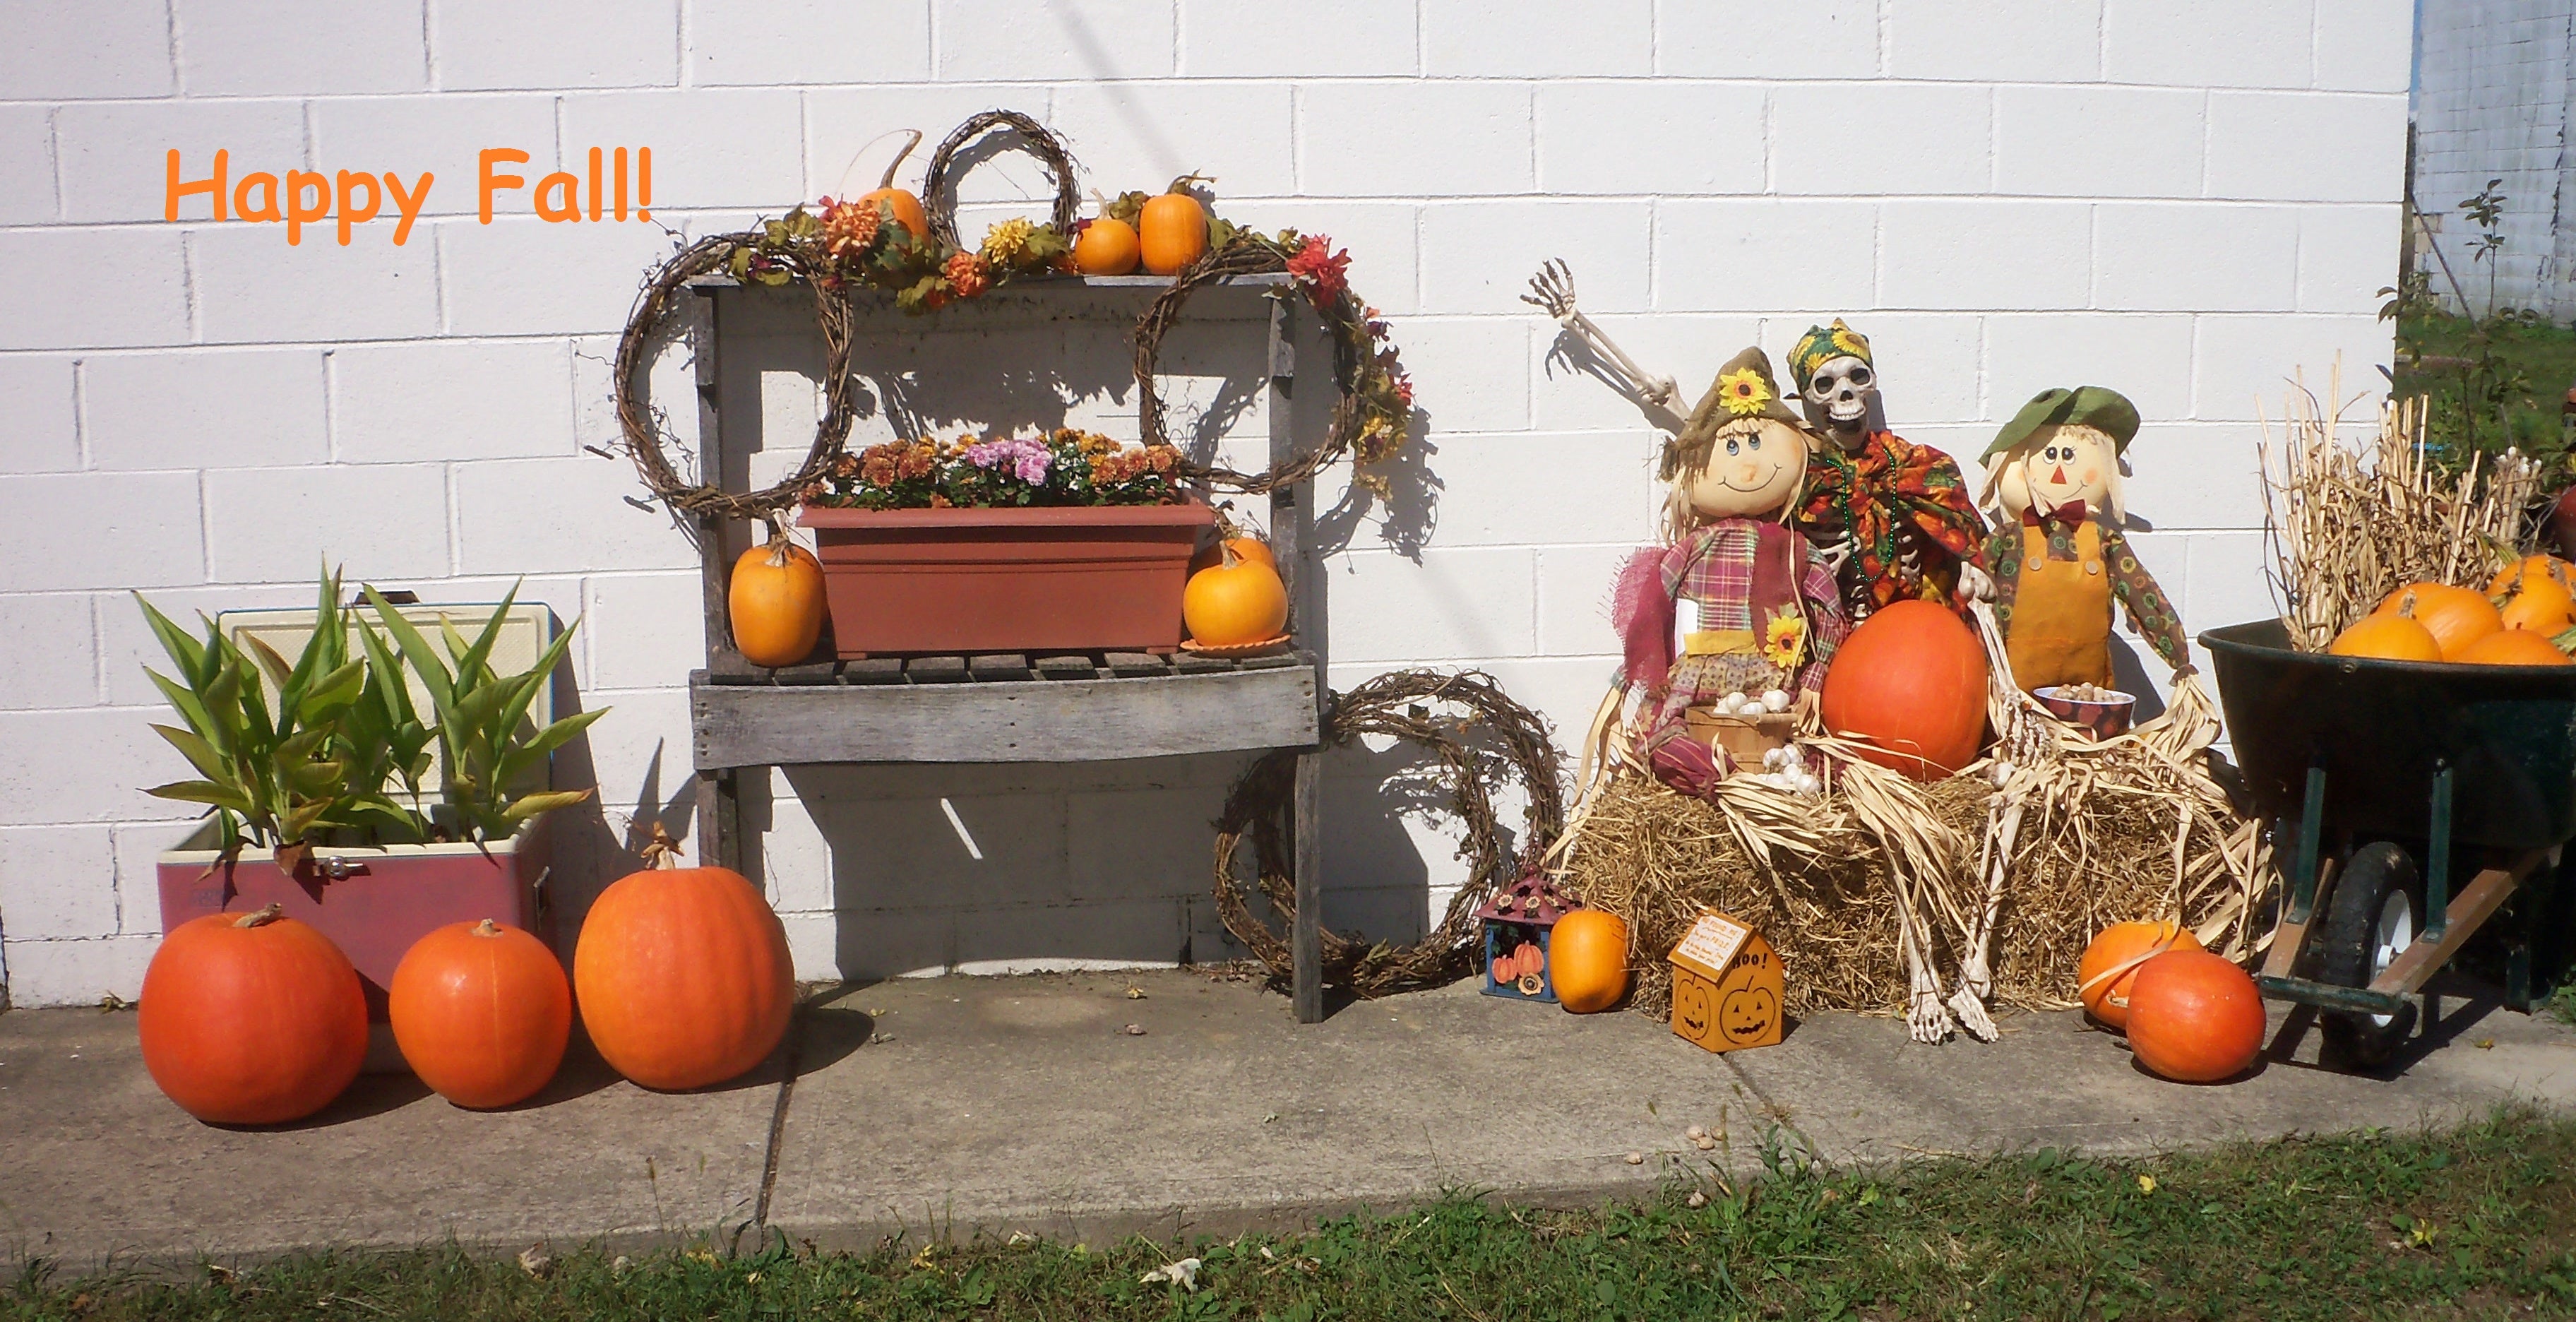 The general store is decorated at fall with field grown pumpkins